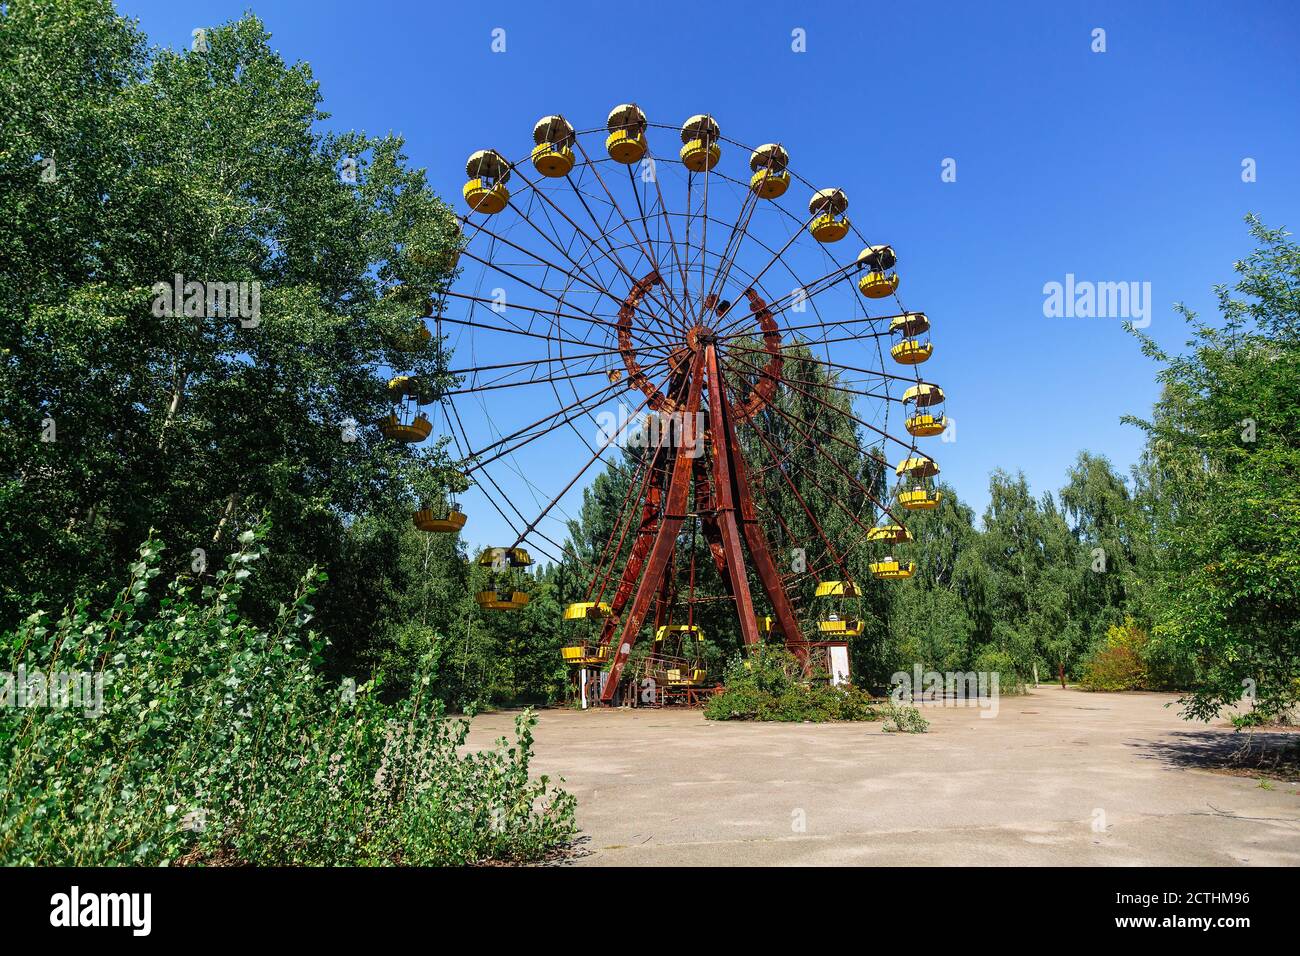 Attraction Ferris Wheel in ghost town Pripyat, Chernobyl Exclusion Zone, nuclear meltdown catastrophe Stock Photo